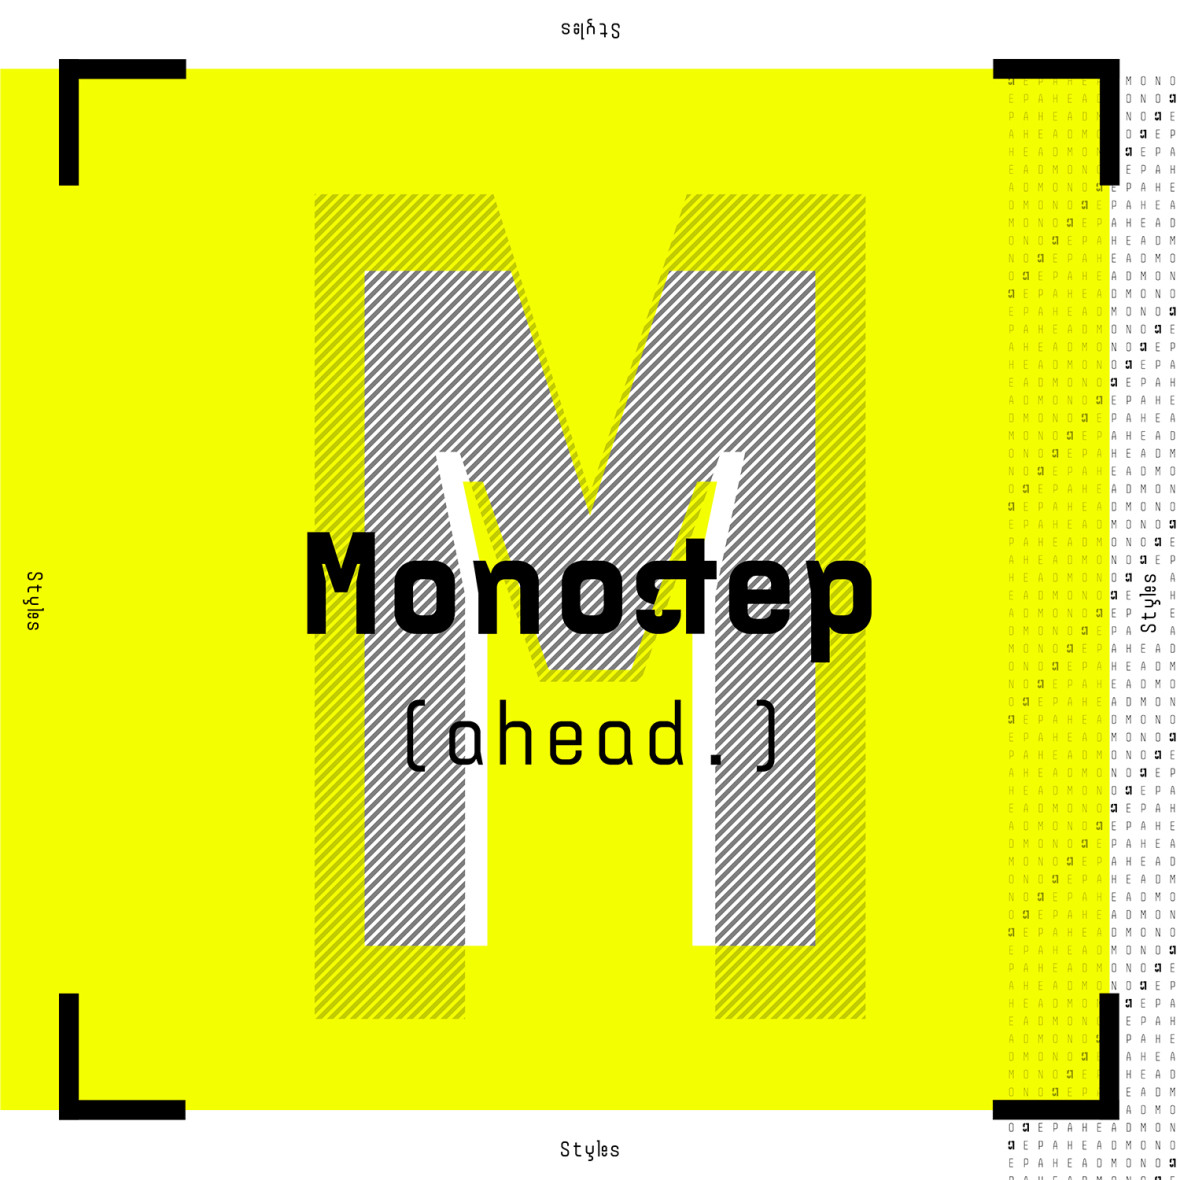 Monostep – not just another Typewriter ()